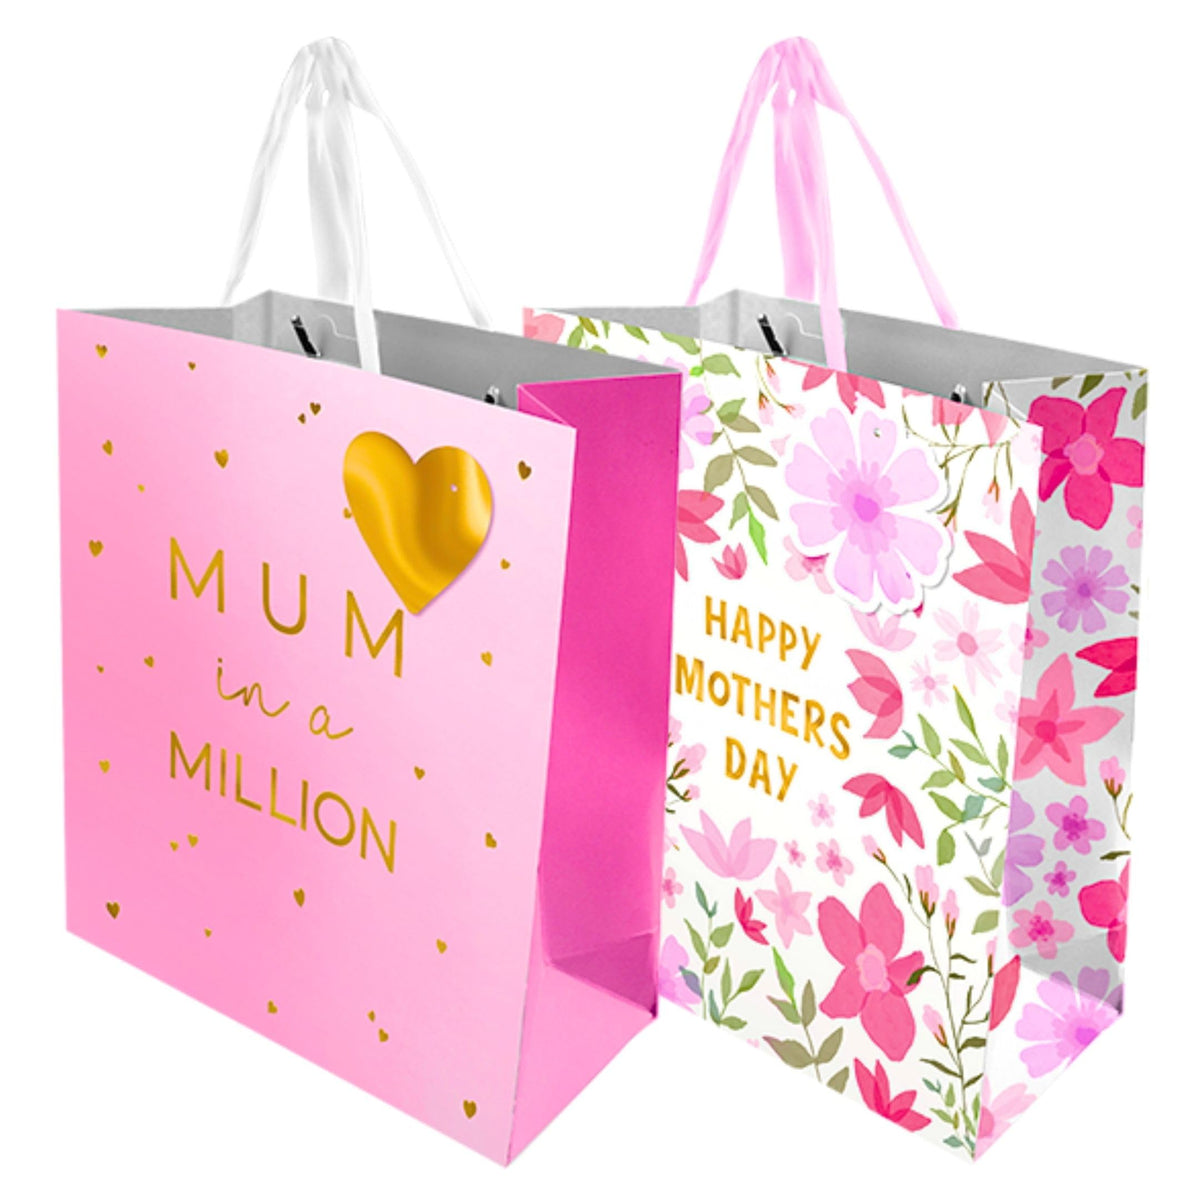 Mothers Day Medium Gift Bags with Gift Tags   Pack of 2   25.4cm x 21.3cm x 10cm   Mothers Day Thick Luxury Paper Gift Bag   Mums Day Gifts Bag